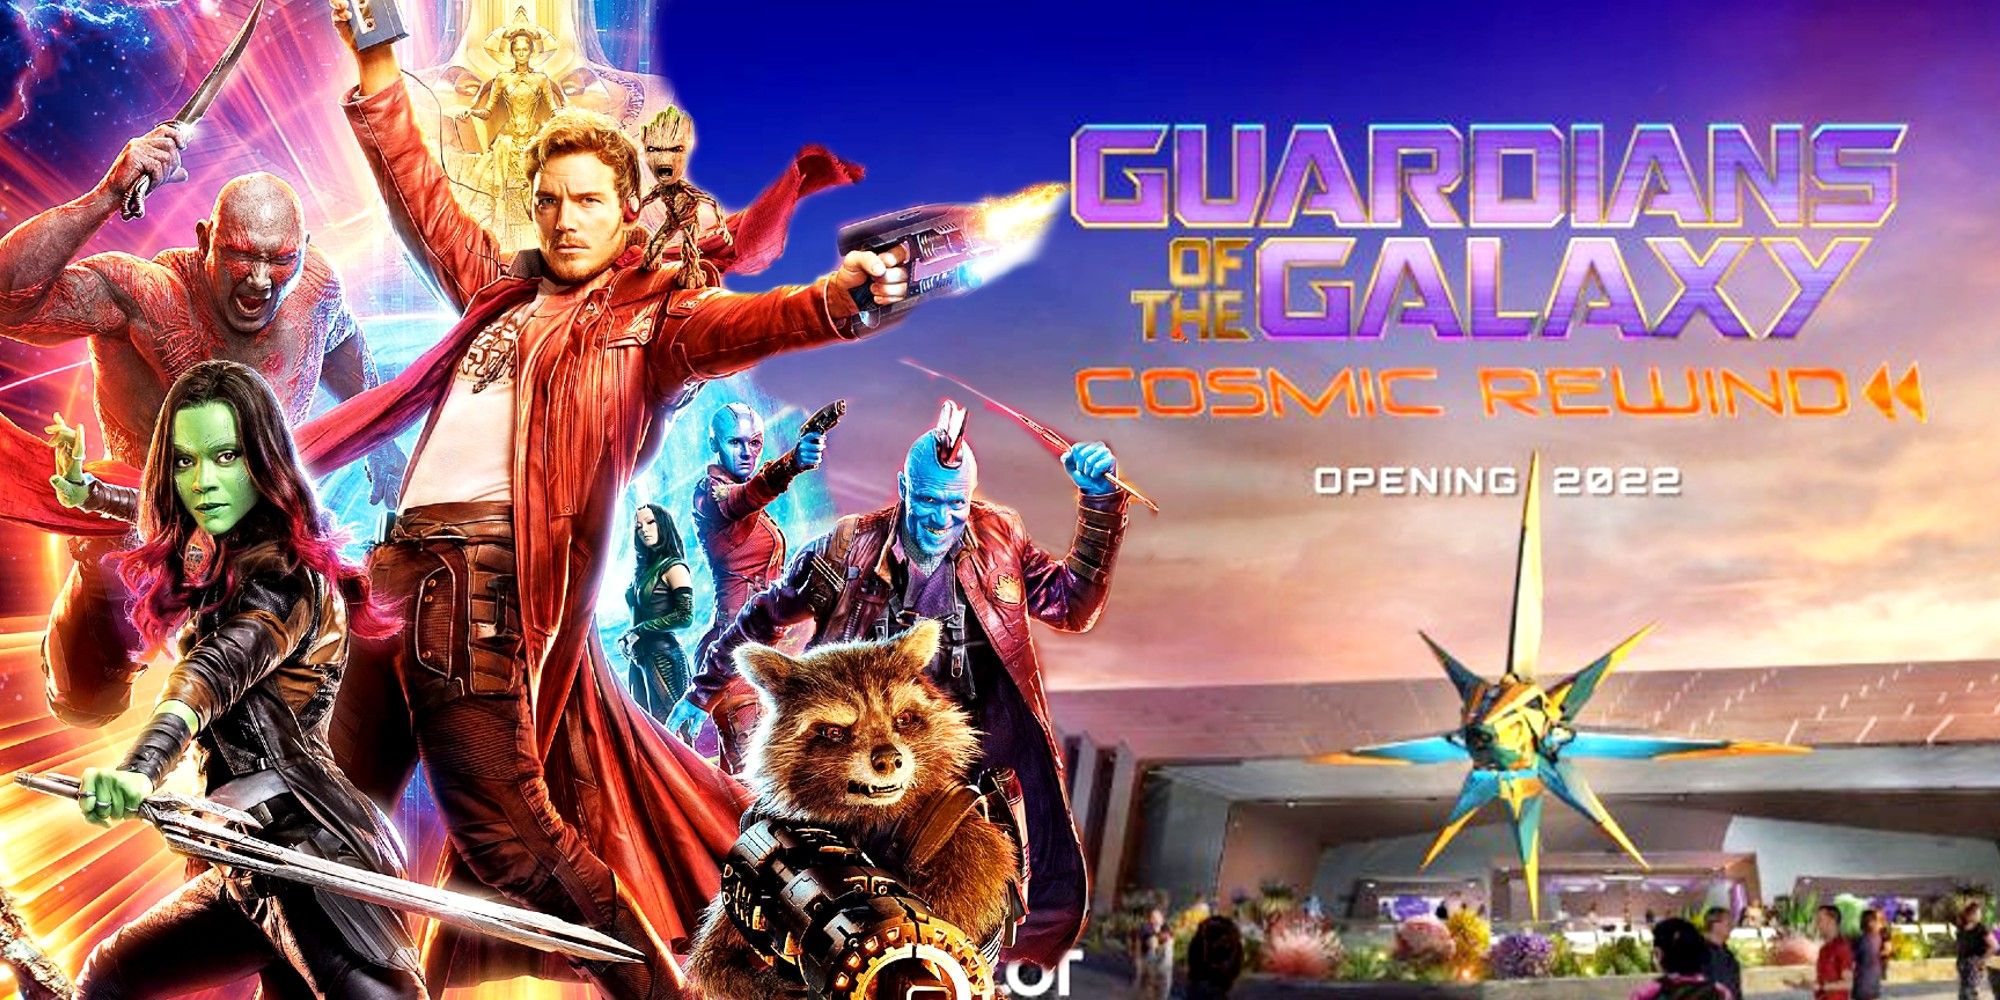 Guardians Of The Galaxy Disney World Ride Will Open In 2022